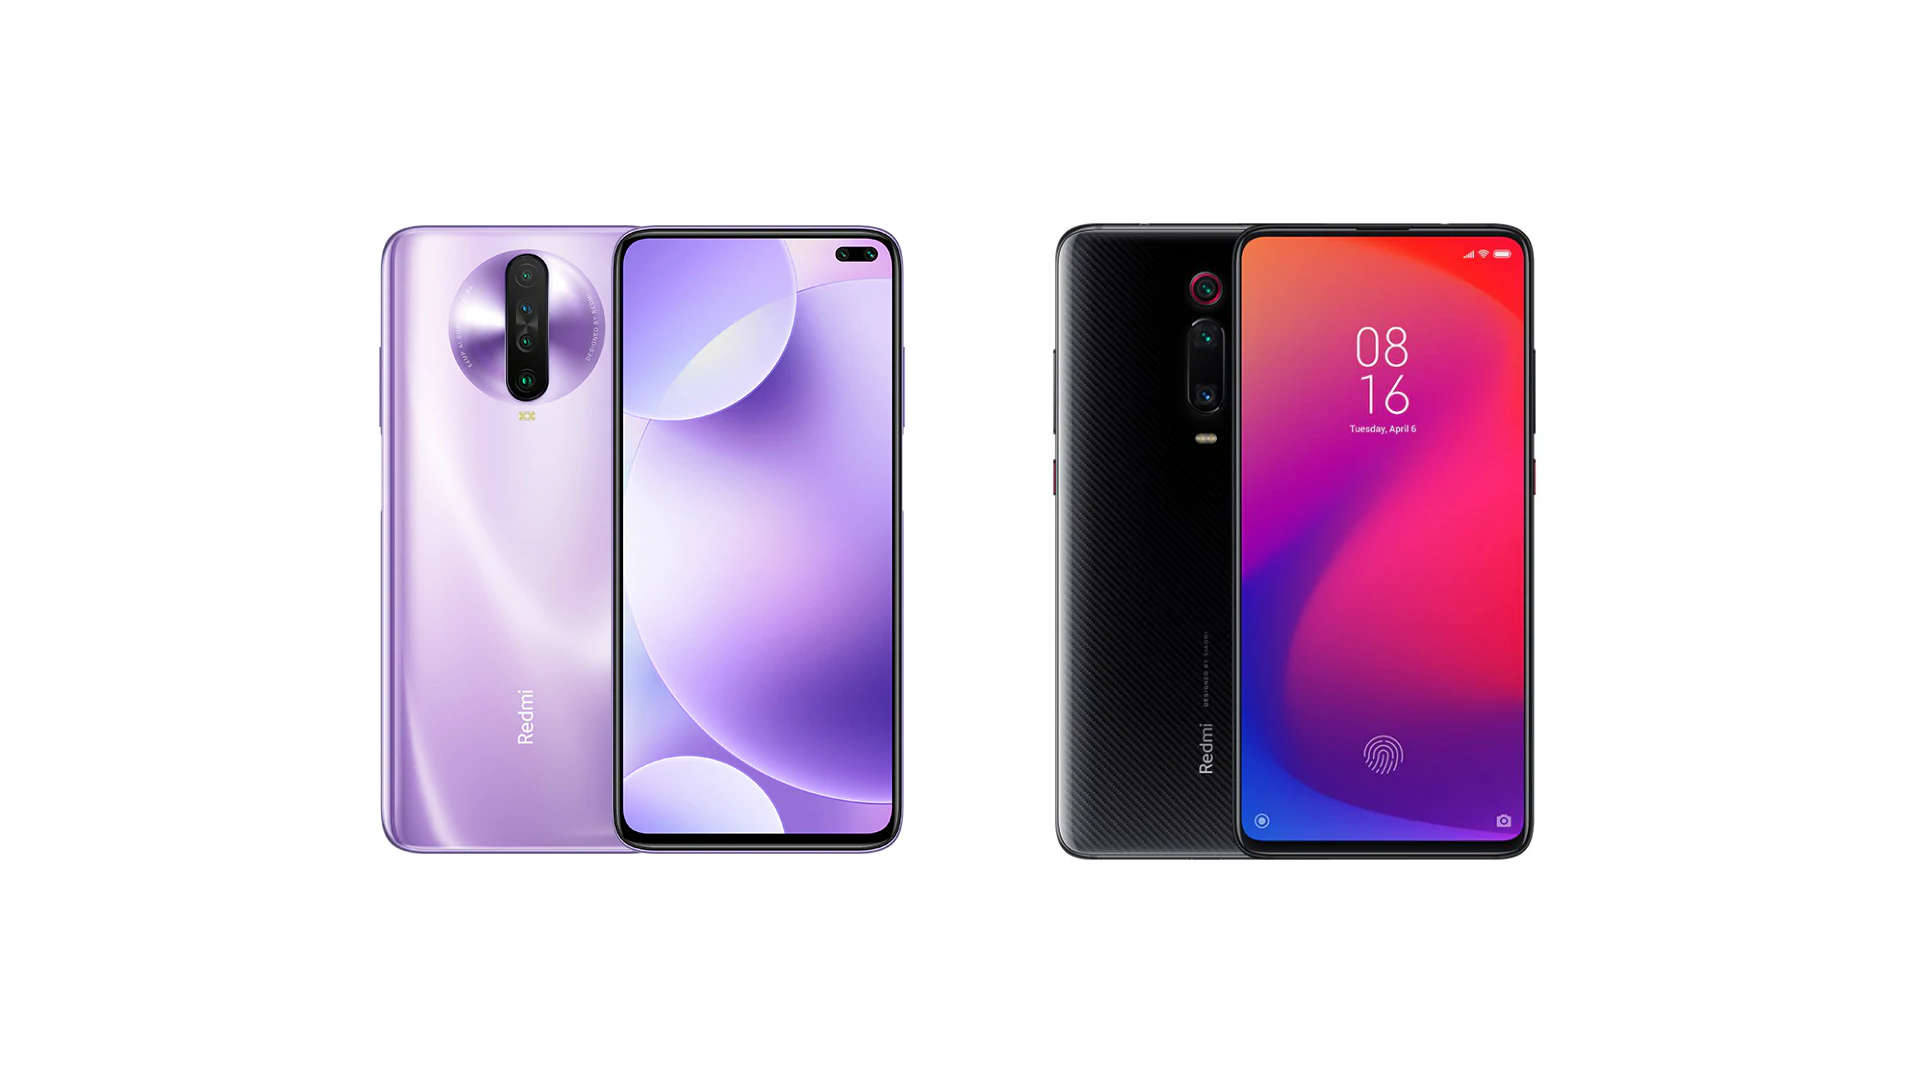 Miui 12.5 redmi 9. Redmi mi 12.5. MIUI 12 mi 9t. MIUI 12.5 Redmi 9a. Redmi Note 12 5g.